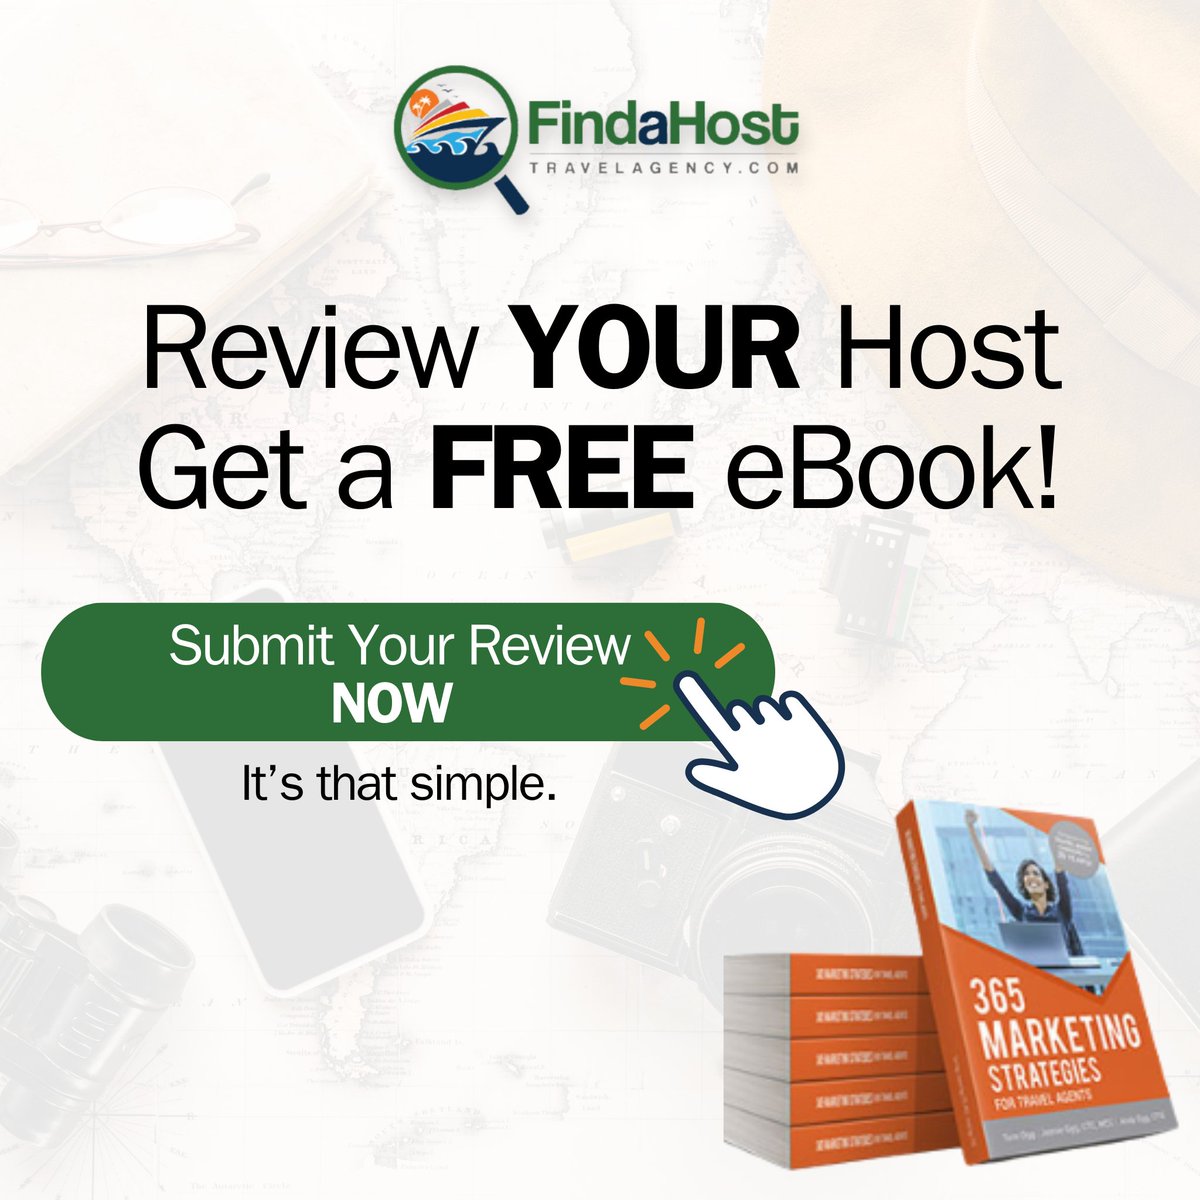 Travel Professional's that submit a review will receive a FREE eBook! “365 Marketing Strategies for Travel Agents” - Written by Tom, Joanie, and Andy Ogg. This complimentary offer is a sincere thank you for taking time in submitting a review; findahosttravelagency.com/submit-review/ #FreeEbook